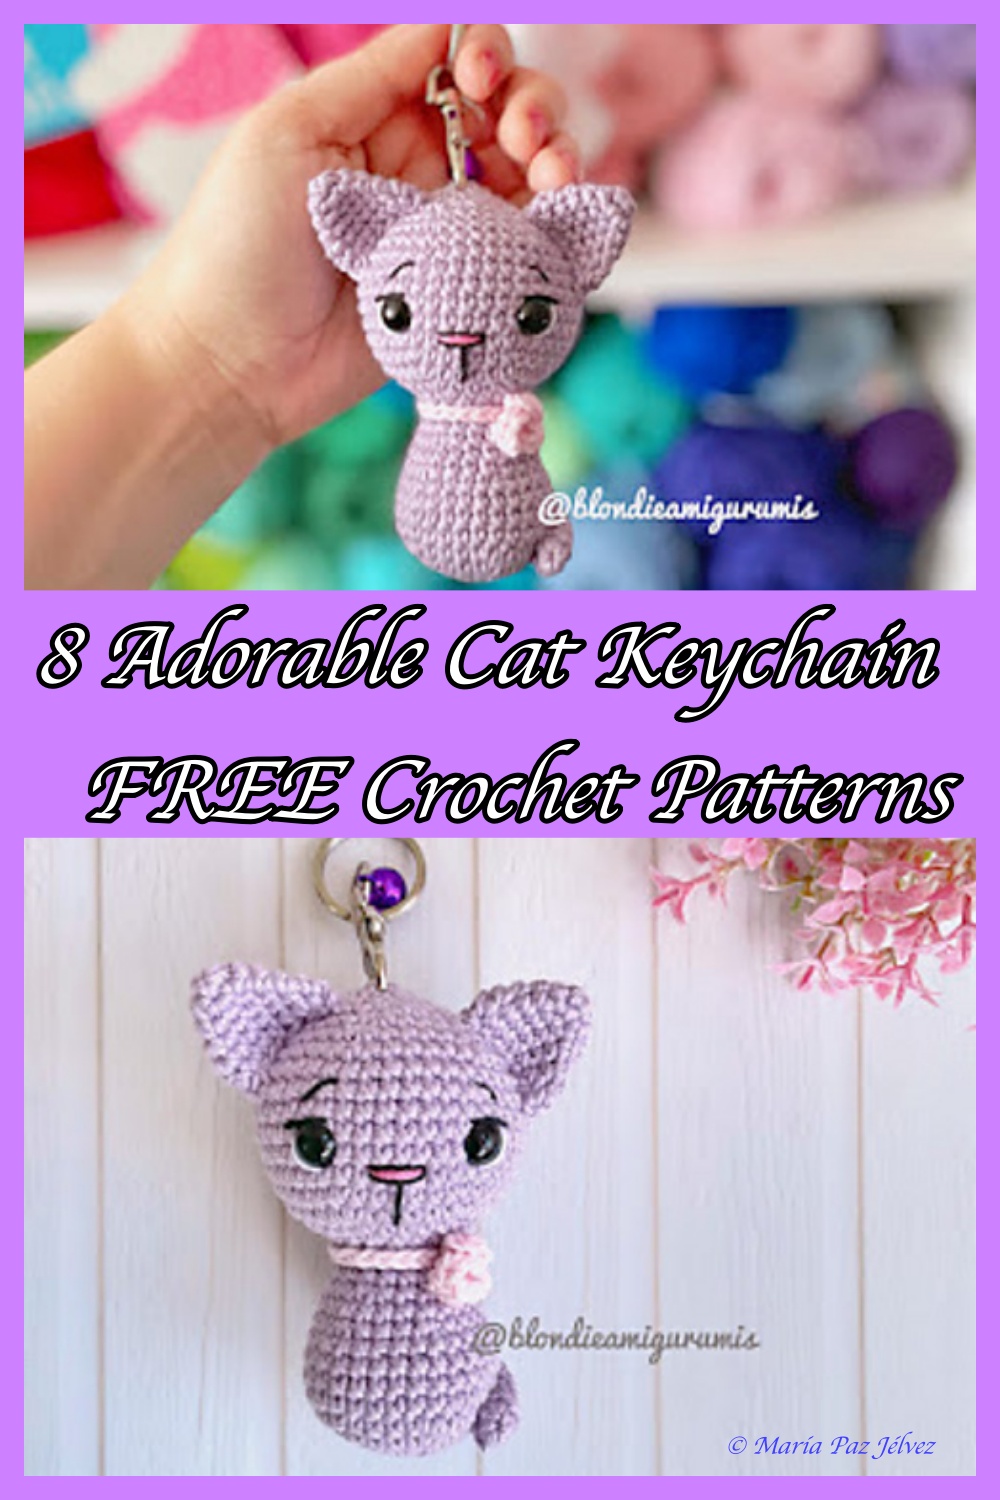 8 Adorable Cat Keychain Crochet Patterns – FREE